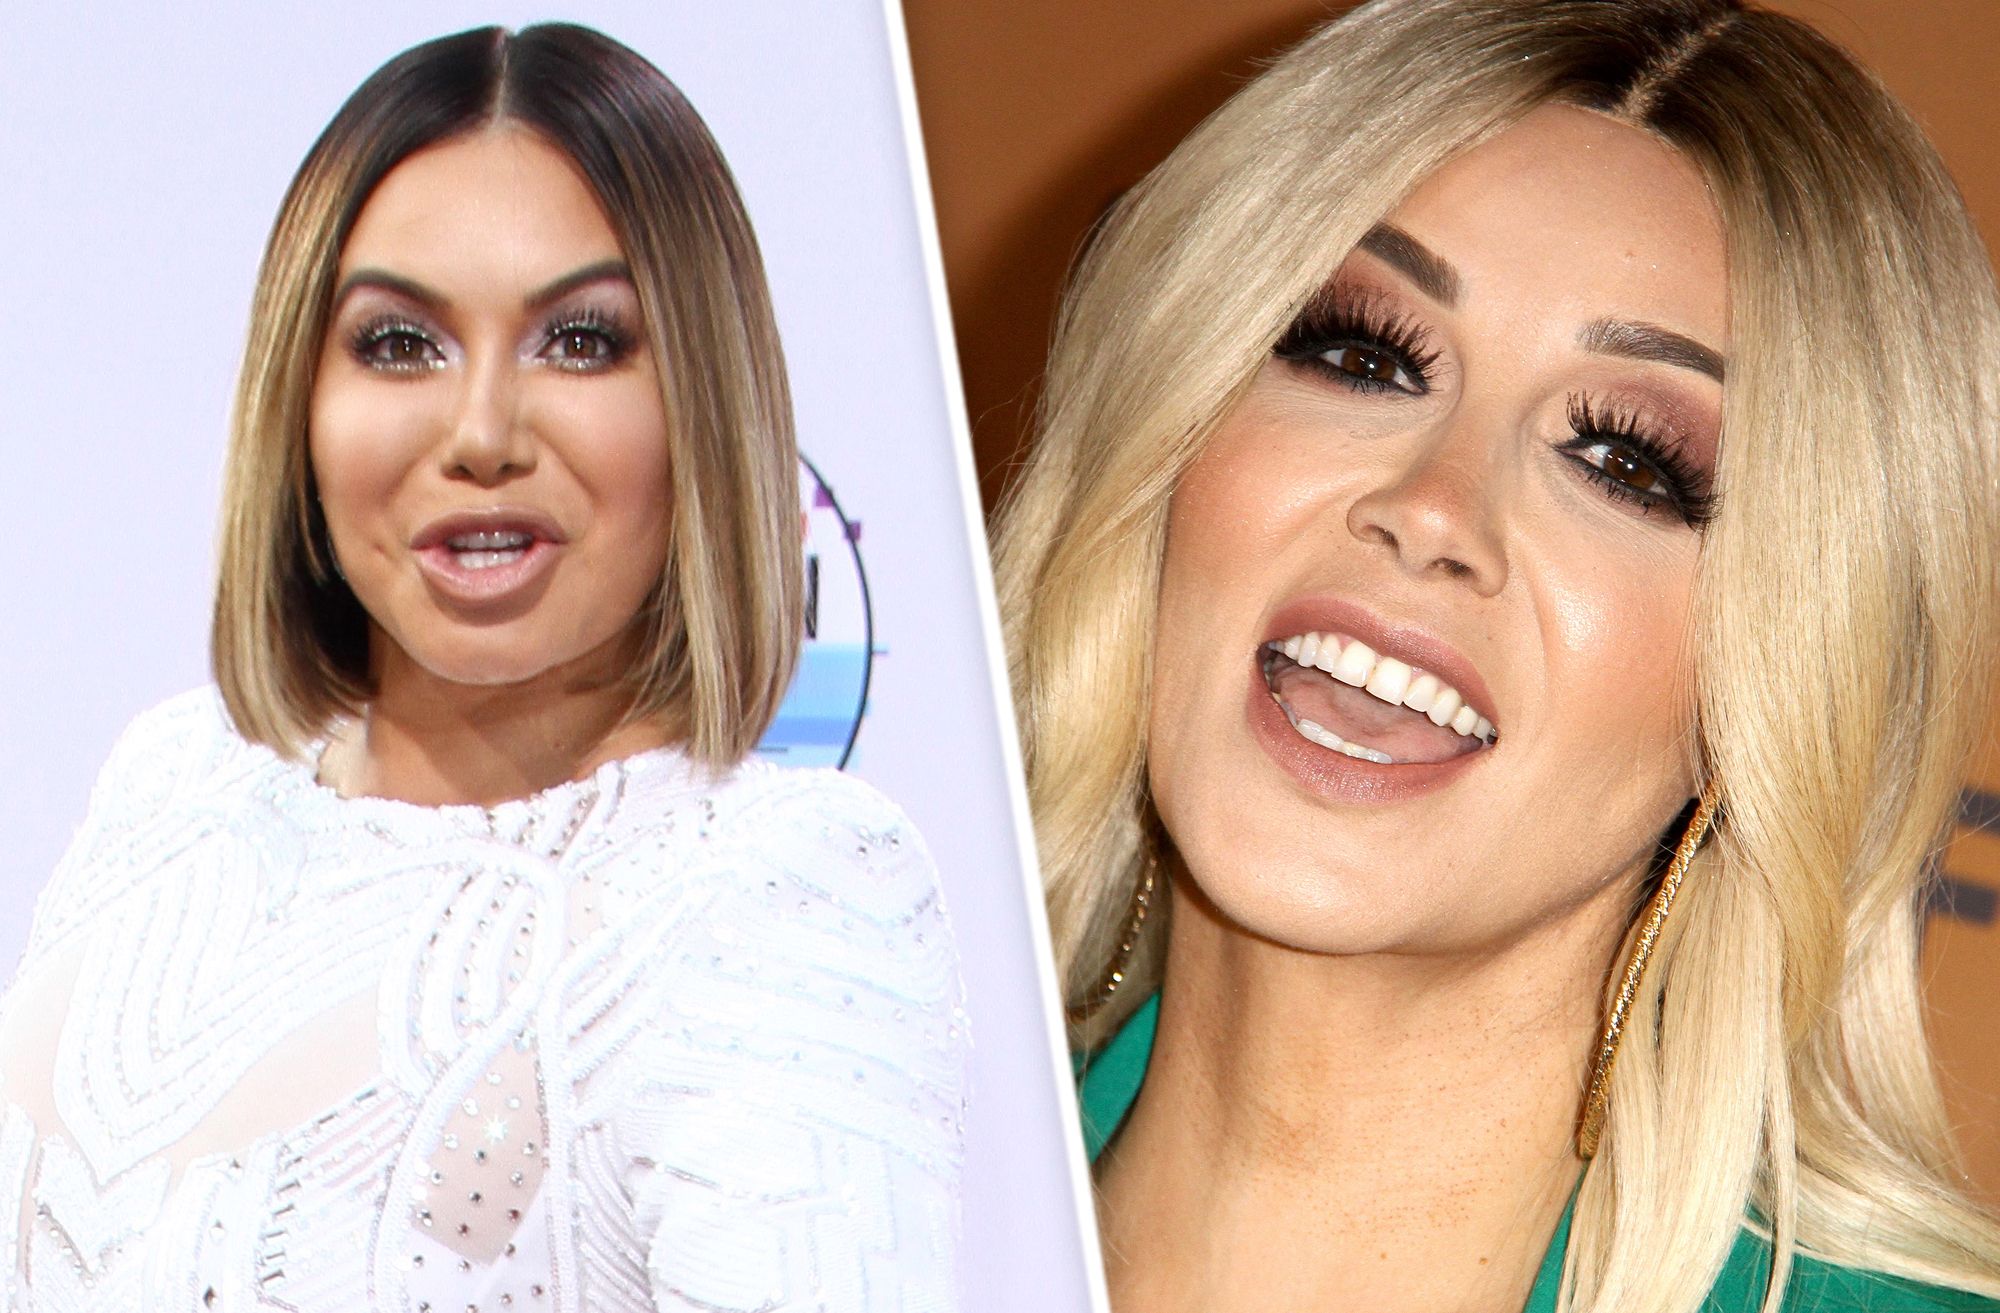 chiquis-rivera-says-that-her-mother's-companies-are-better-since-her-aunt-rosie-is-no-longer-in-charge